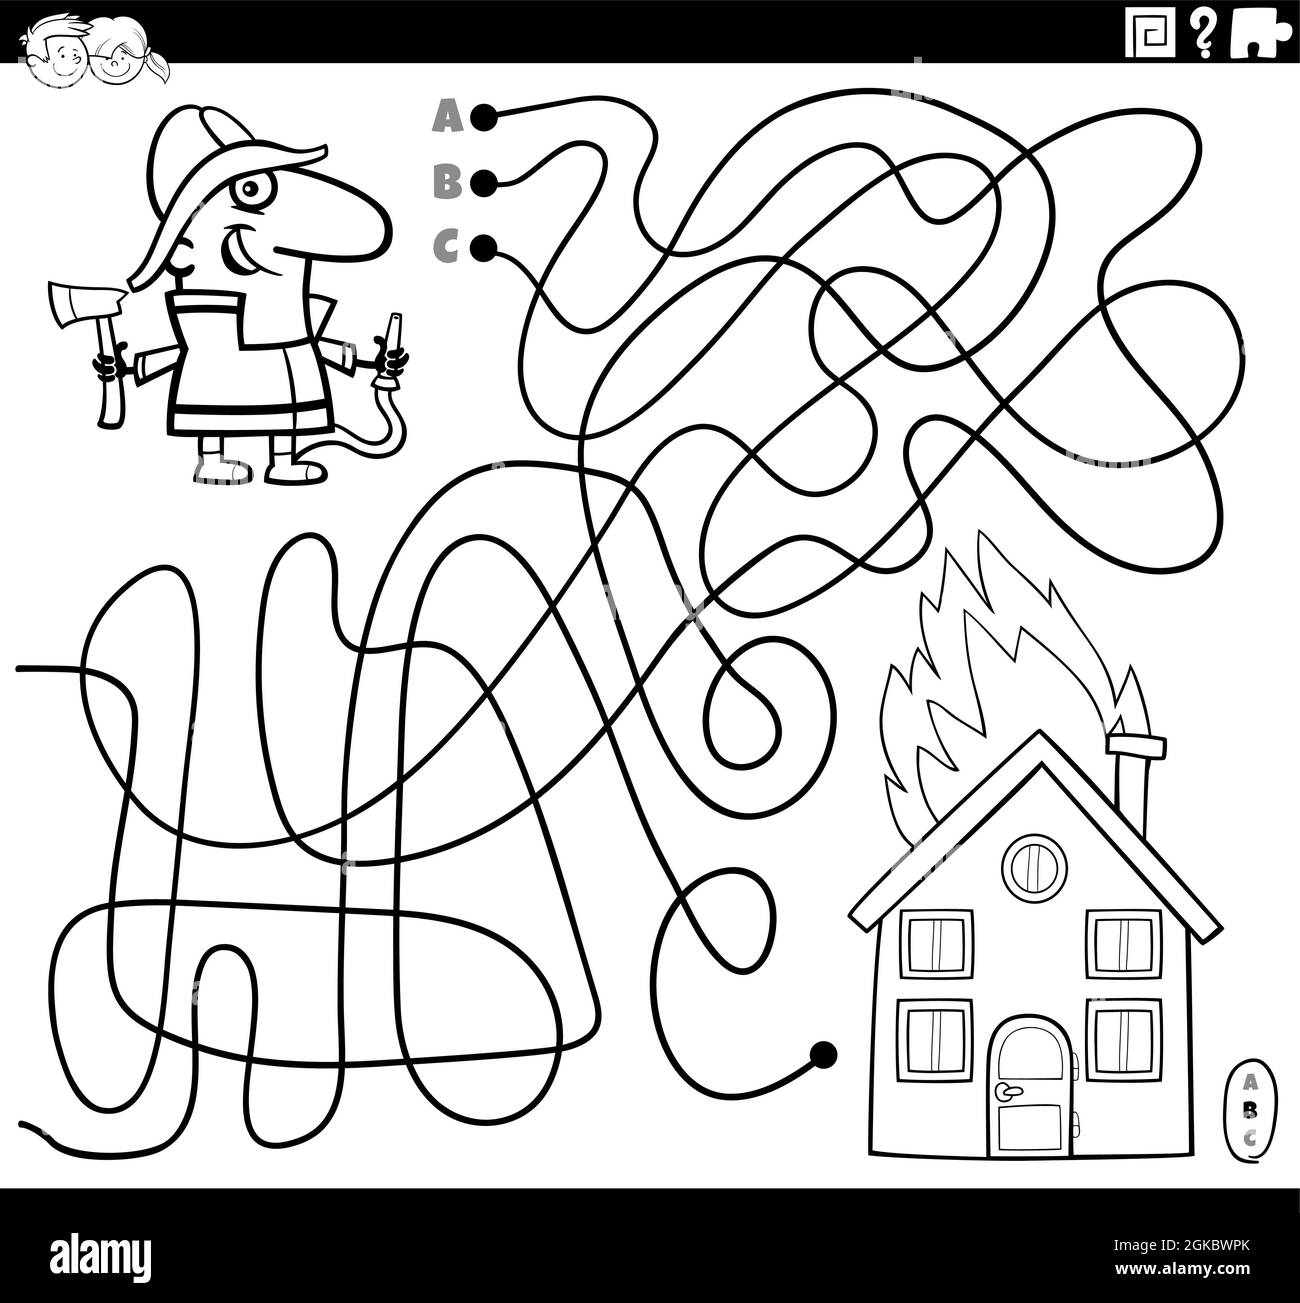 Black and white cartoon illustration of lines maze puzzle game with firefighter character and burning house coloring book page Stock Vector